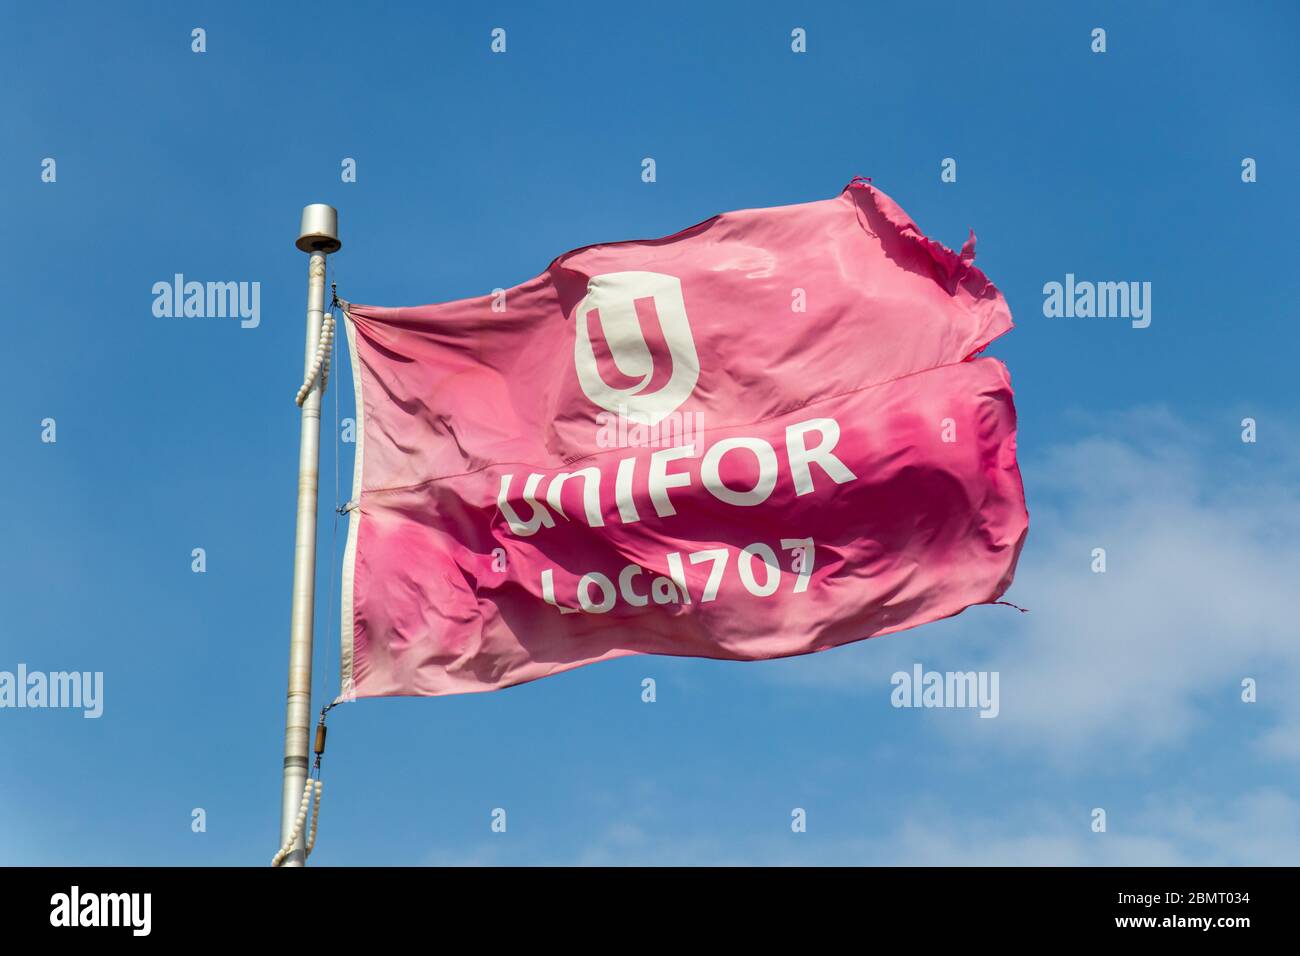 UNIFOR logo on flag at the Ford Oakville Assembly Complex, UNIFOR is general trade union in Canada and the largest private sector union in Canada. Stock Photo